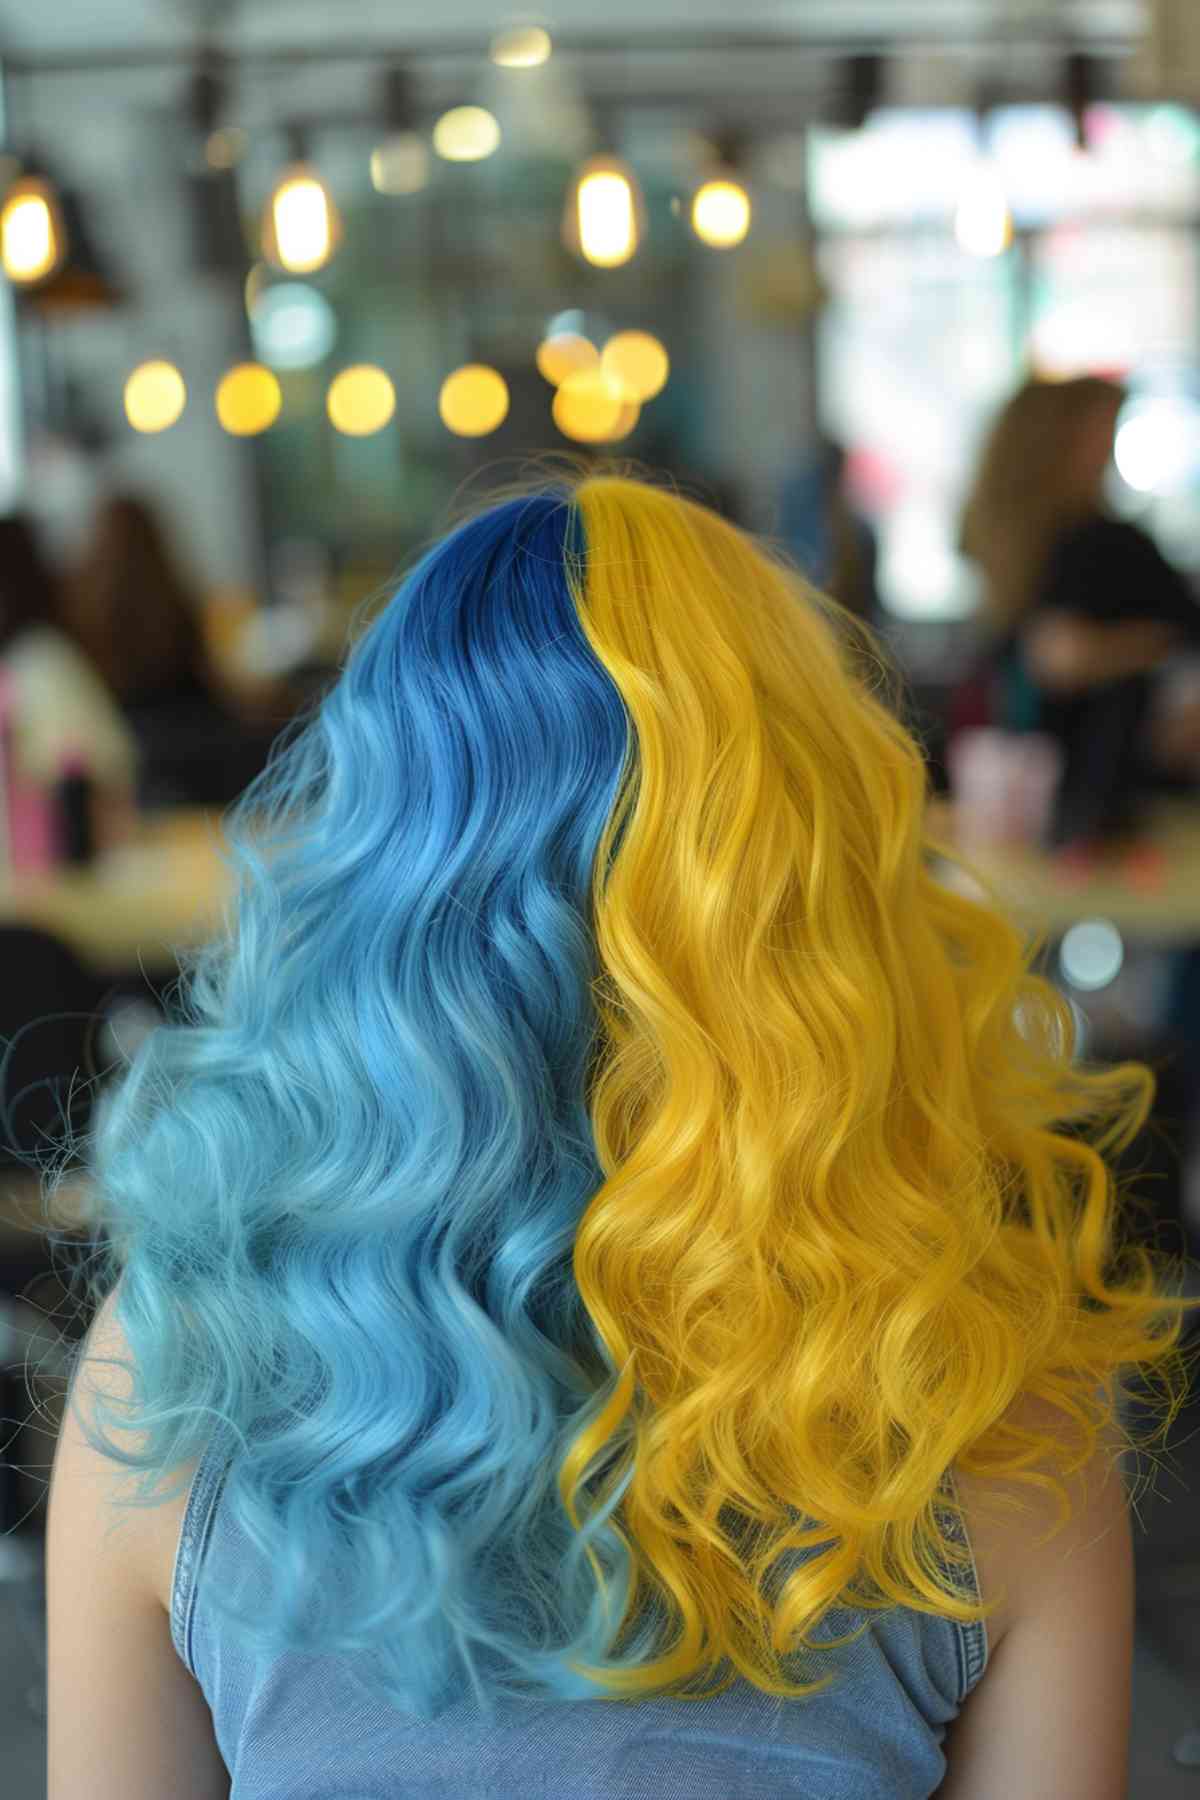 Shoulder-length curly hair with yellow to blue ombre, adding volume and softening facial angles.